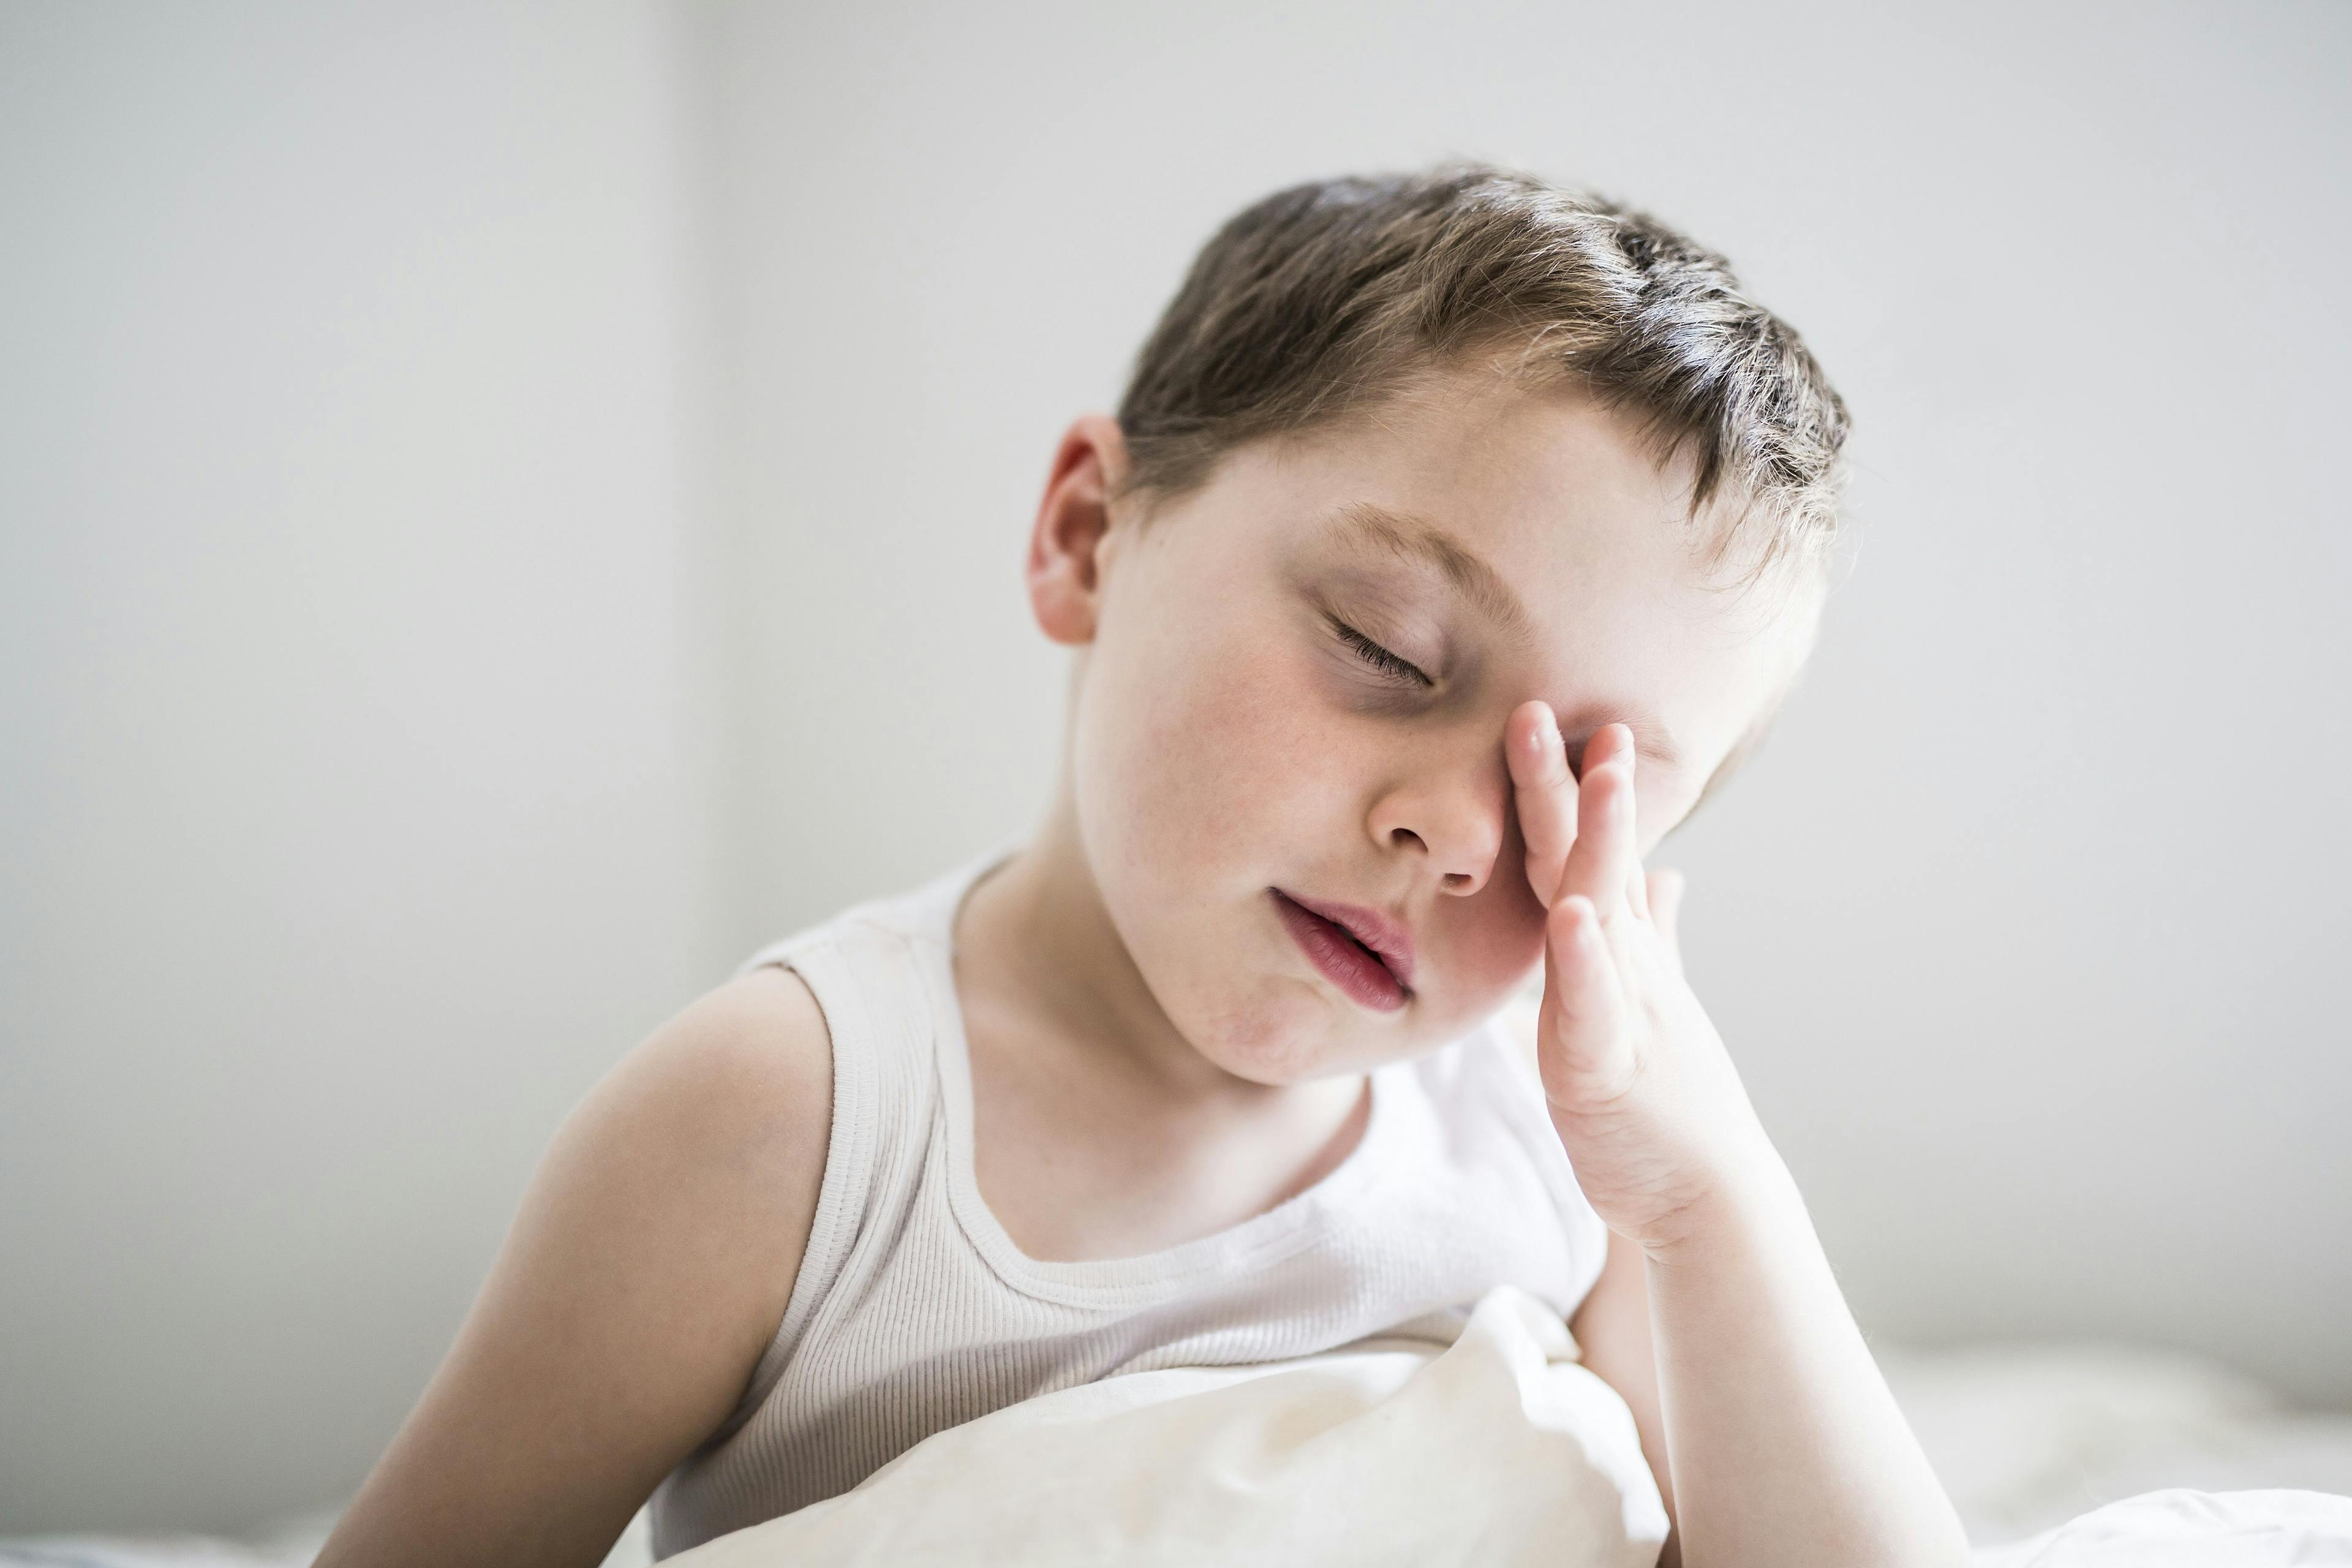 Insufficient Efficacy of Fatigue Interventions for Pediatric Rheumatic Conditions 